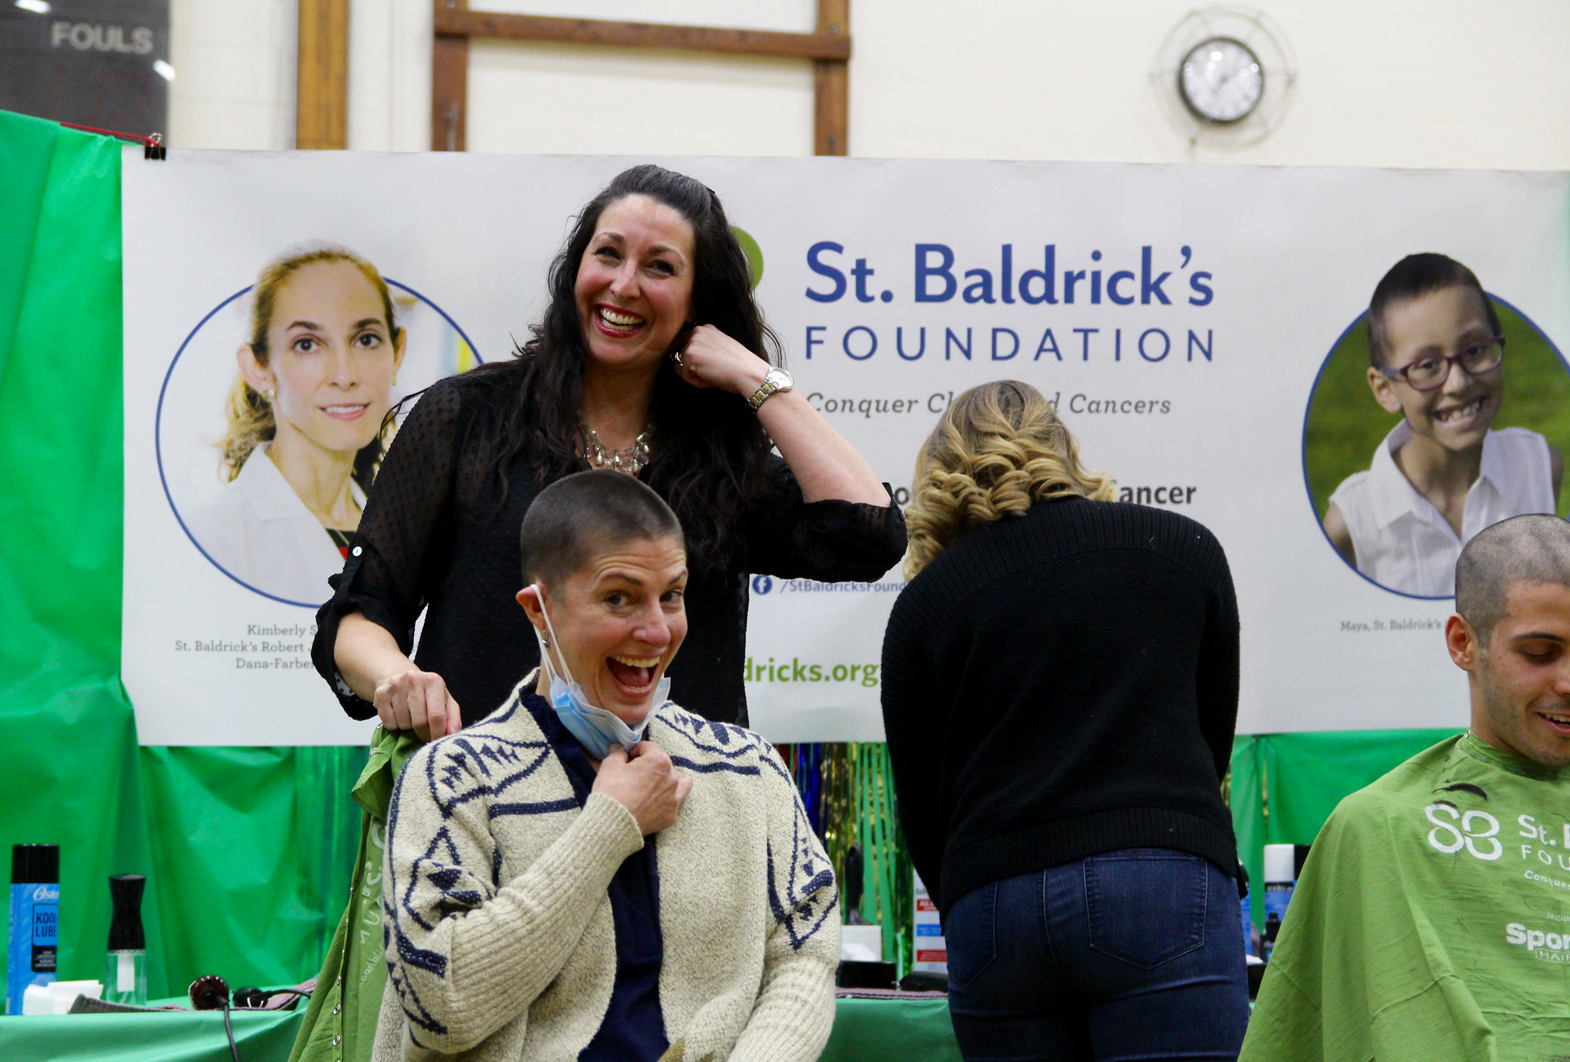 Heather Brown took of her hair at the St. Baldrick's head shaving event at Western Middle School on March 15, 2018 Photo: Leslie Yager